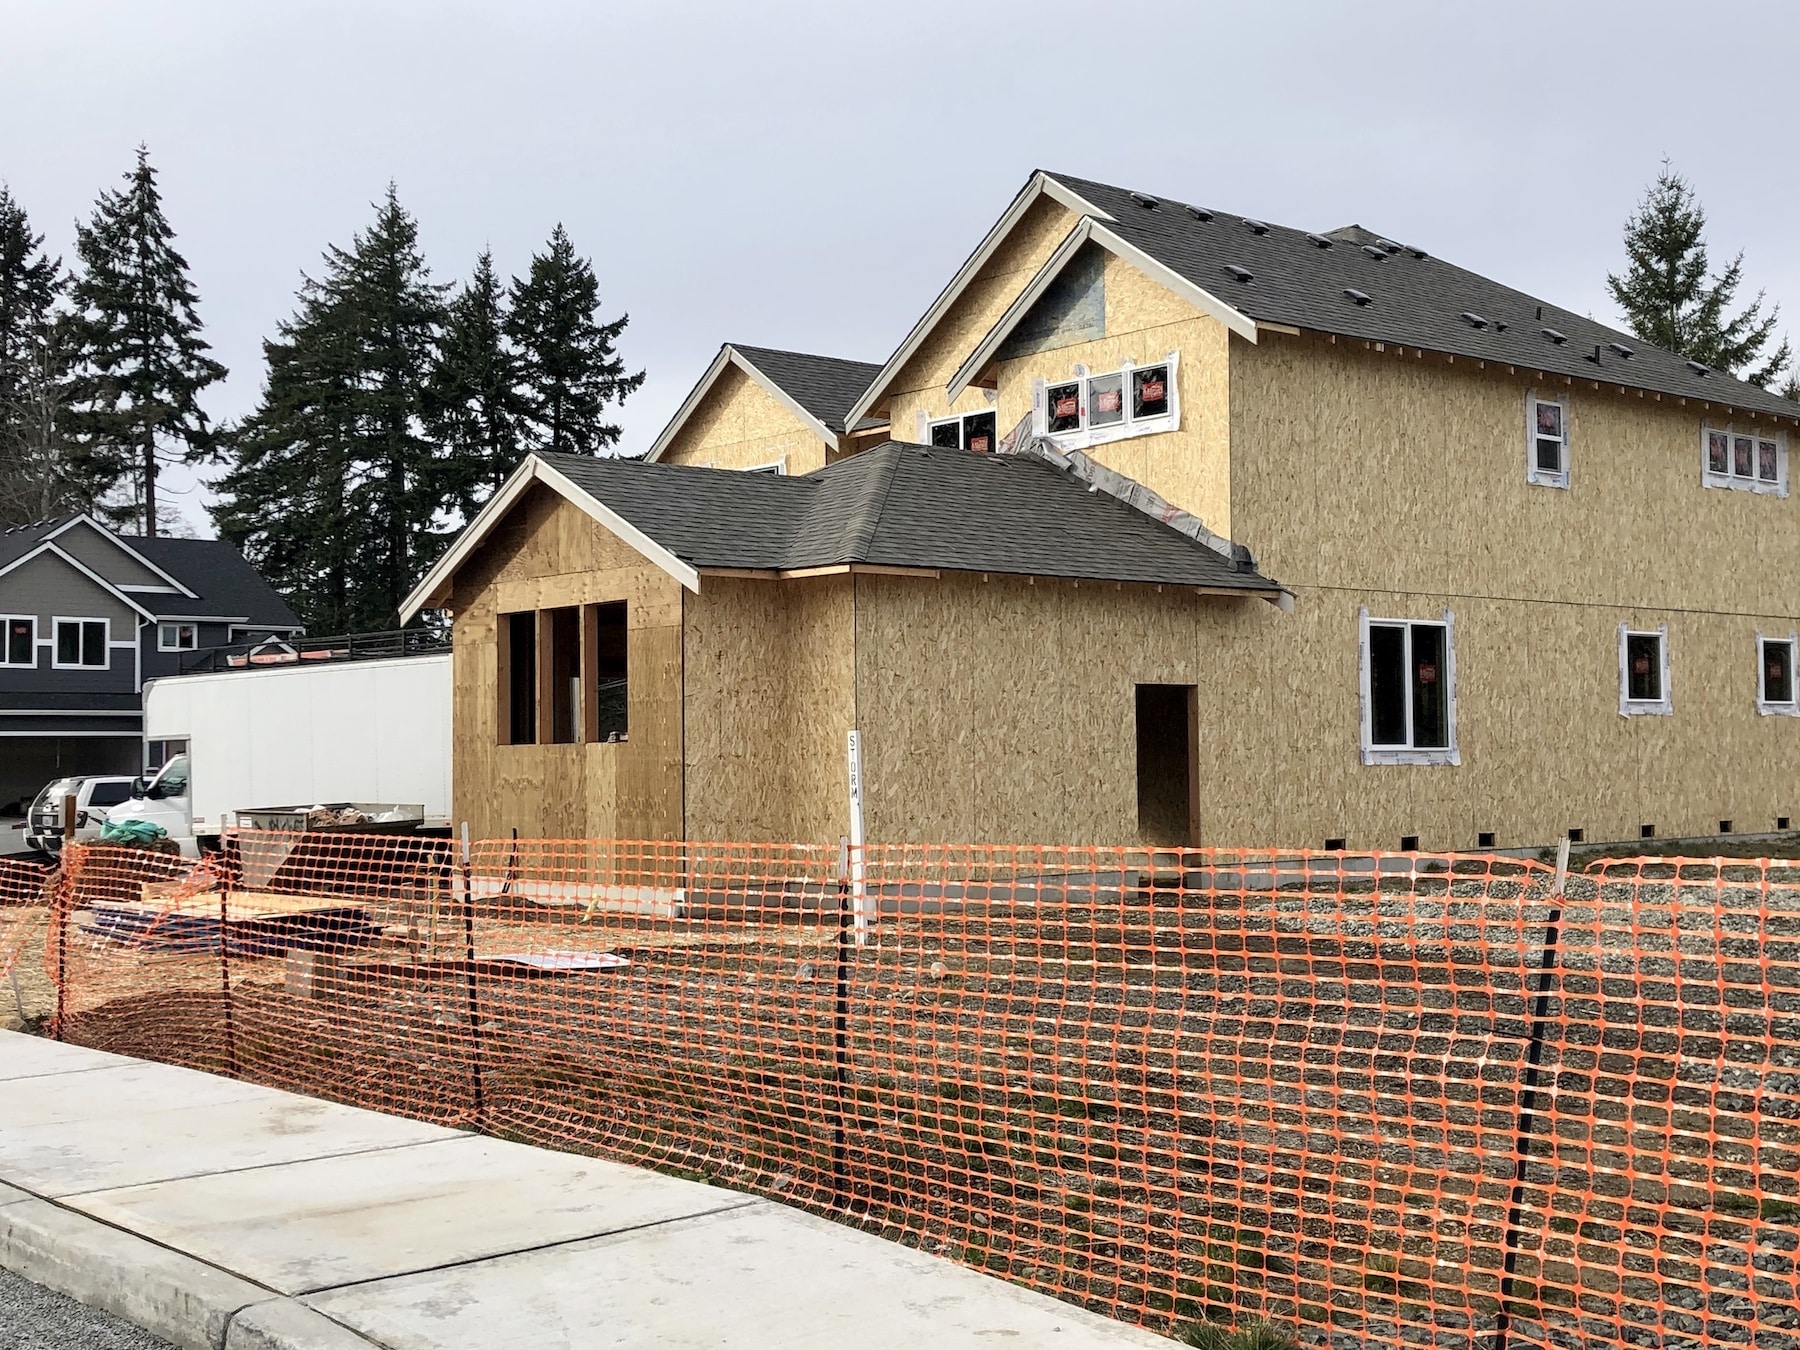 The value of an average house in unincorporated Gig Harbor is now more than $900,000.